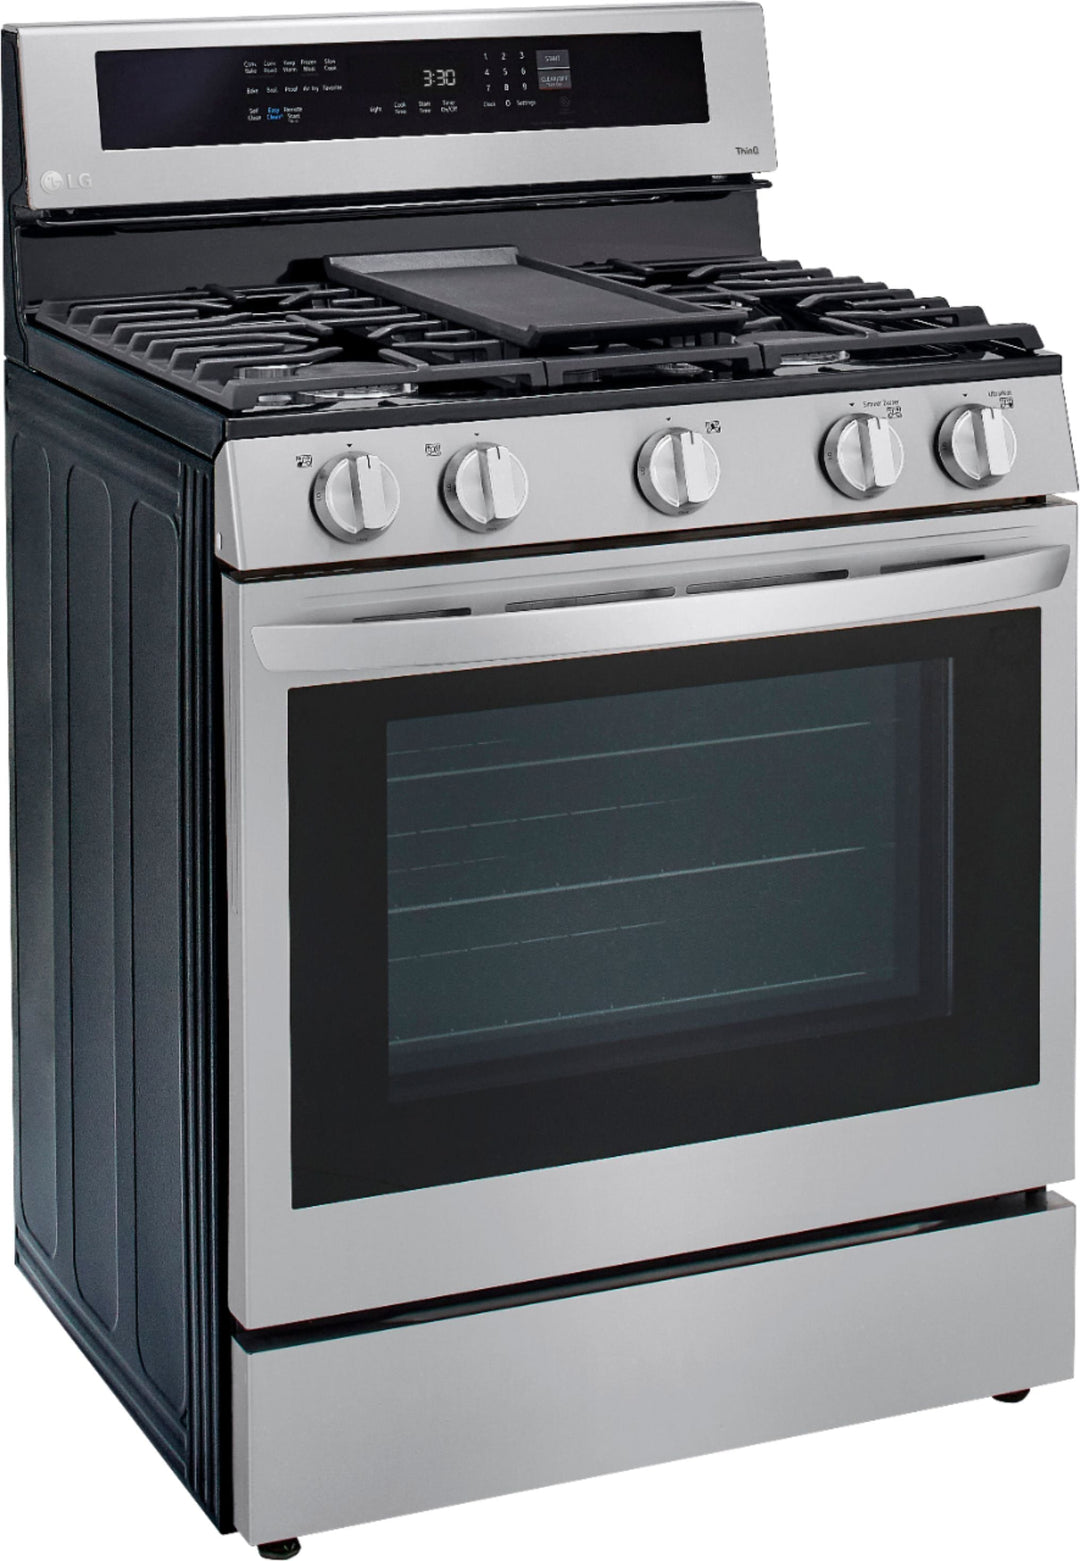 LG - 5.8 Cu. Ft. Freestanding Gas True Convection Range with EasyClean, InstaView and AirFry - Stainless steel_12